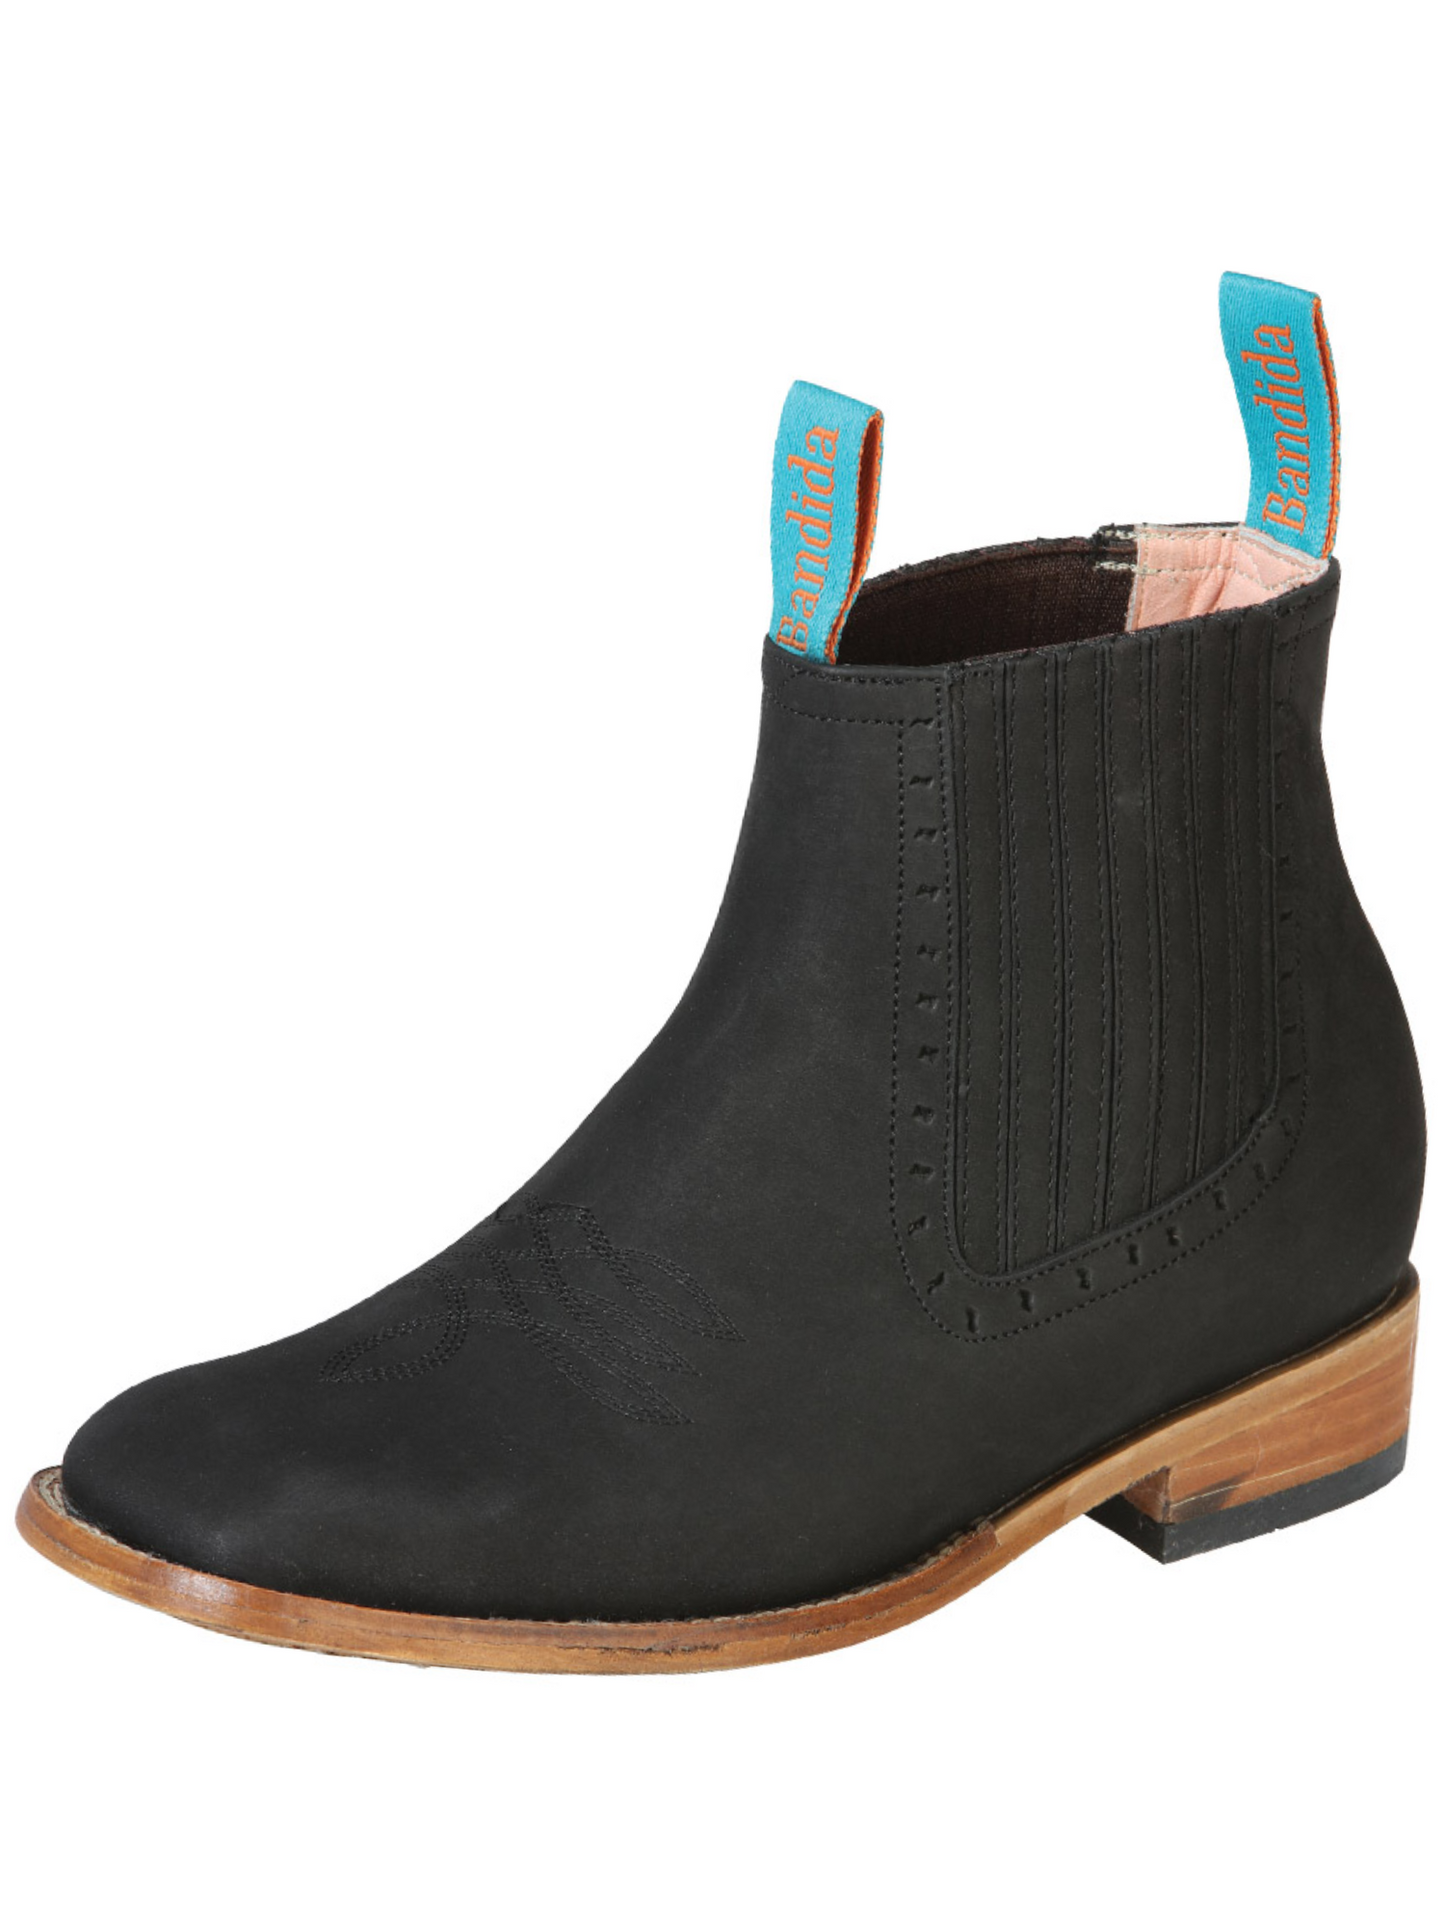 Classic Nubuck Leather Rodeo Cowboy Ankle Boots for Women 'La Barca' - ID: 126663 Western Ankle Boots La Barca Black